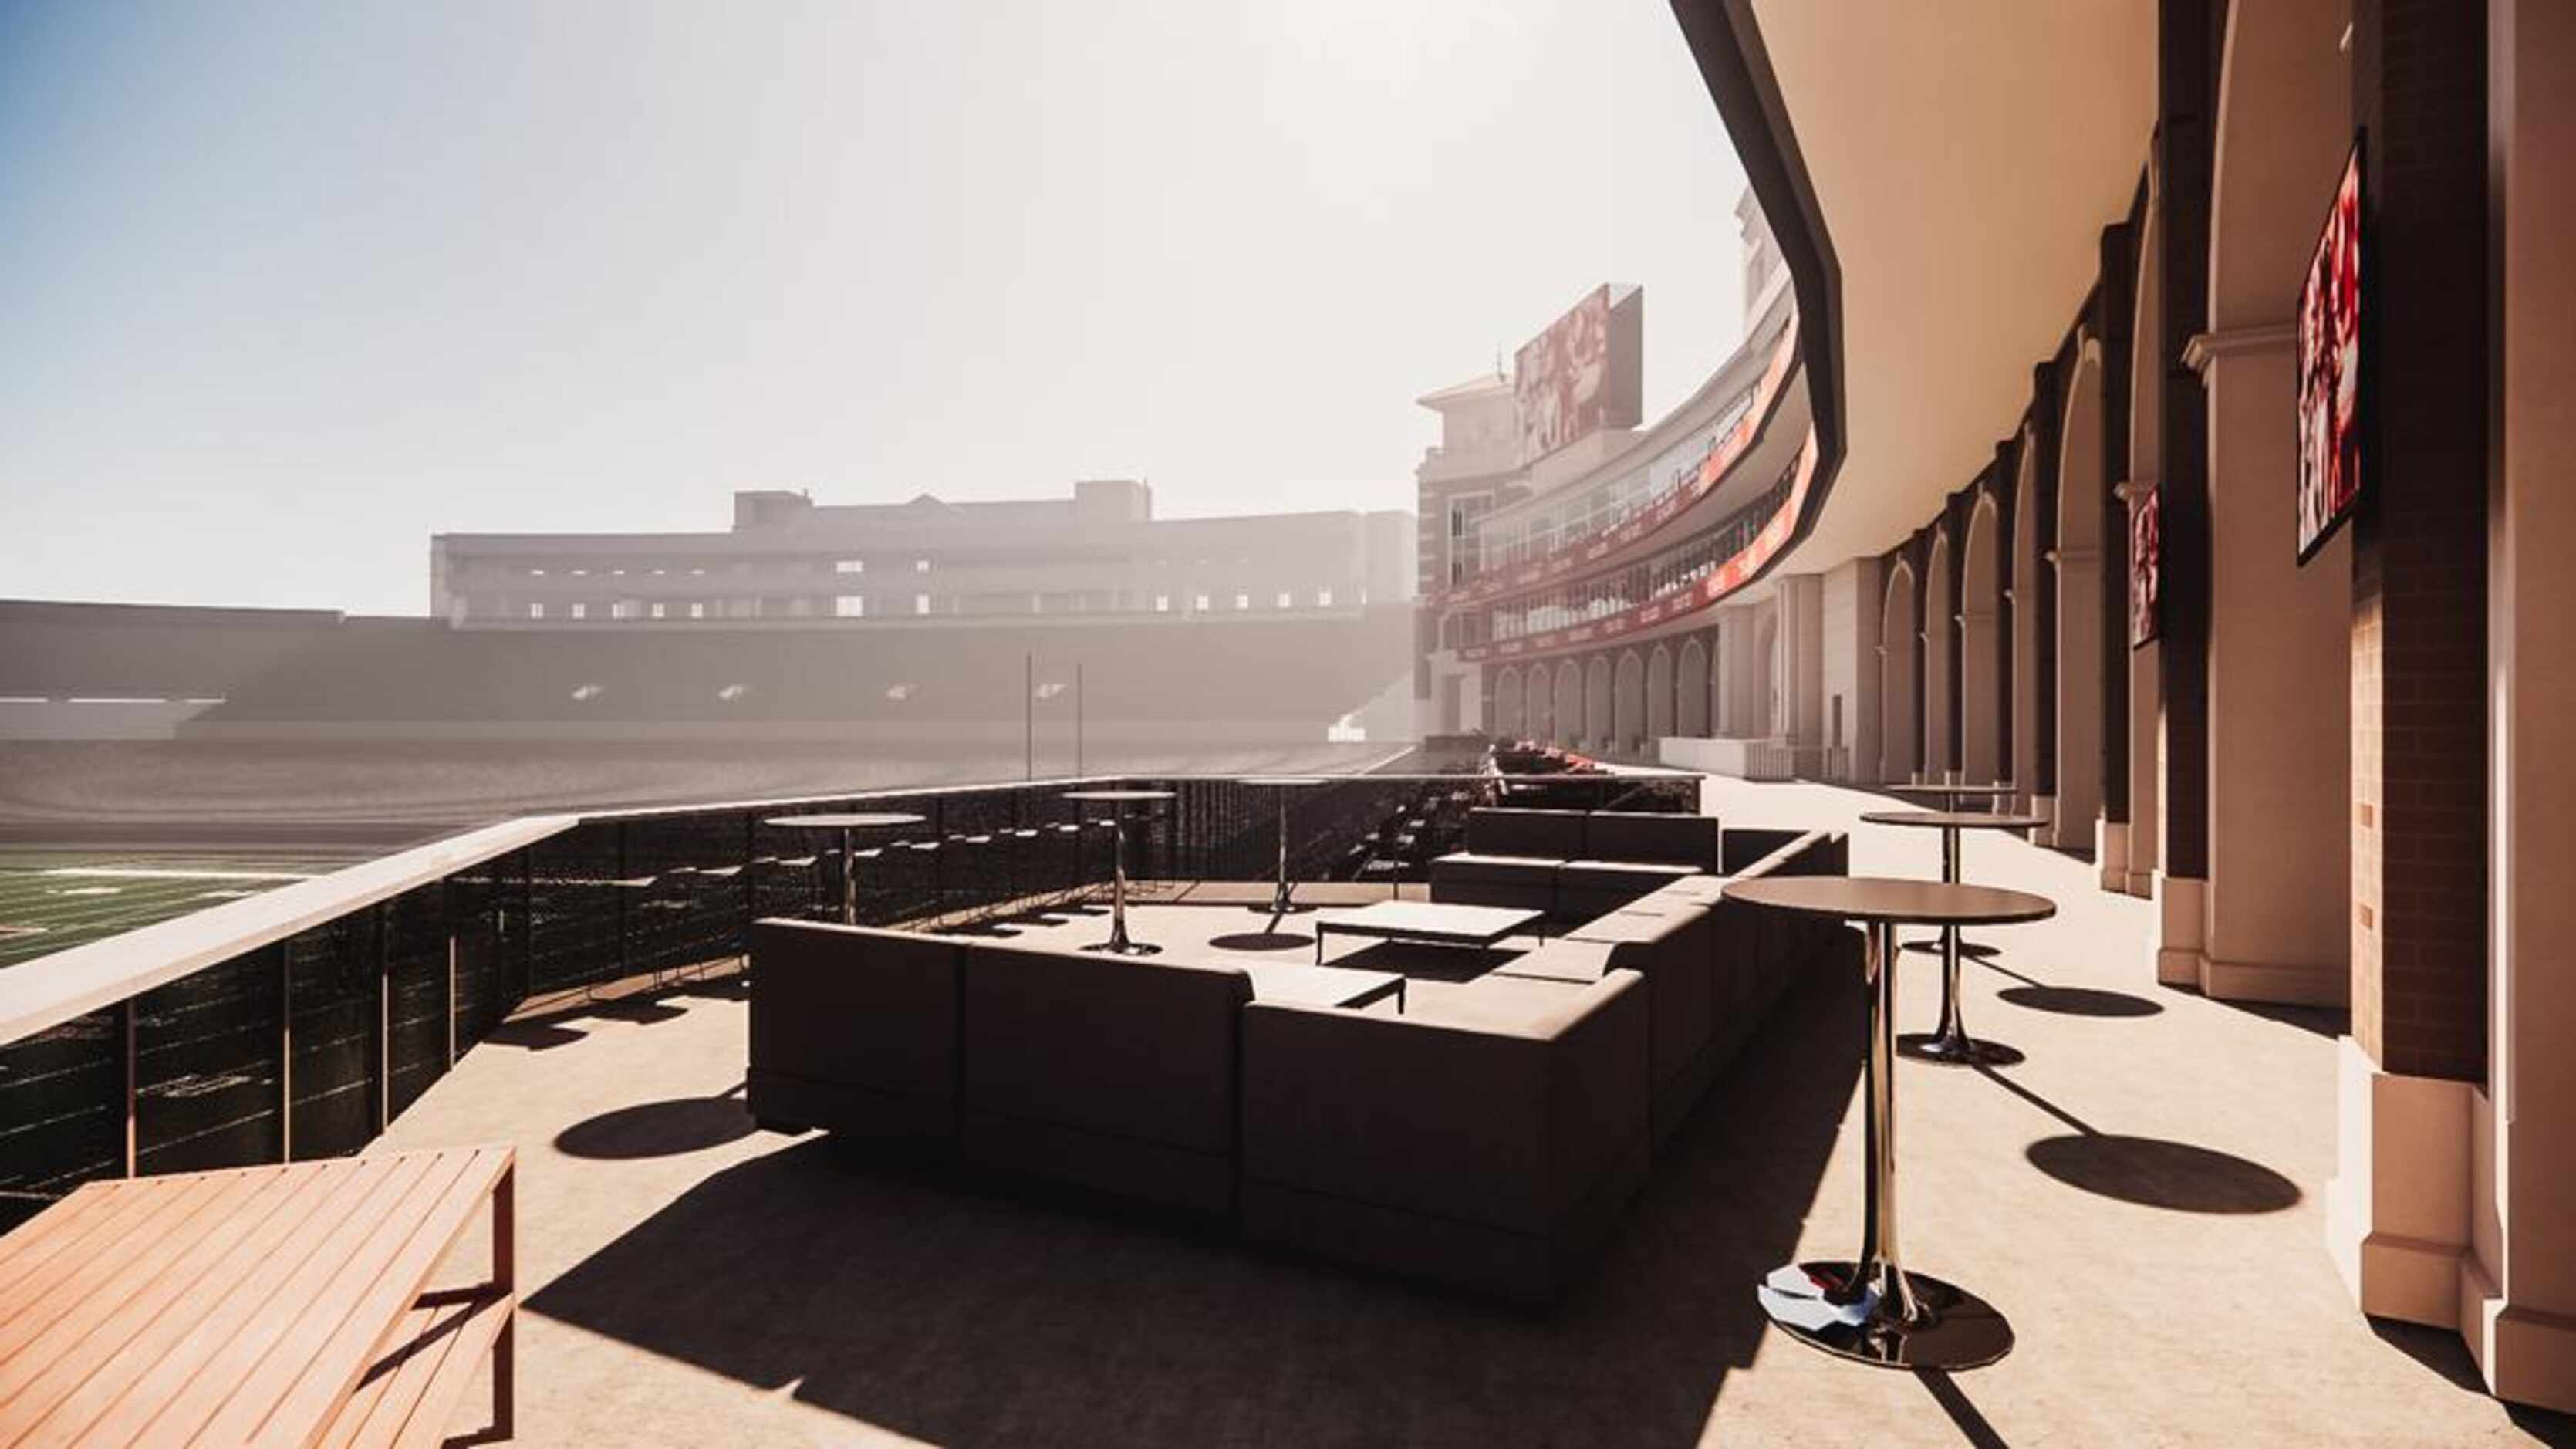 Rendering of the new south end zone at Jones AT&T Stadium. (Courtesy of Texas Tech Athletics)